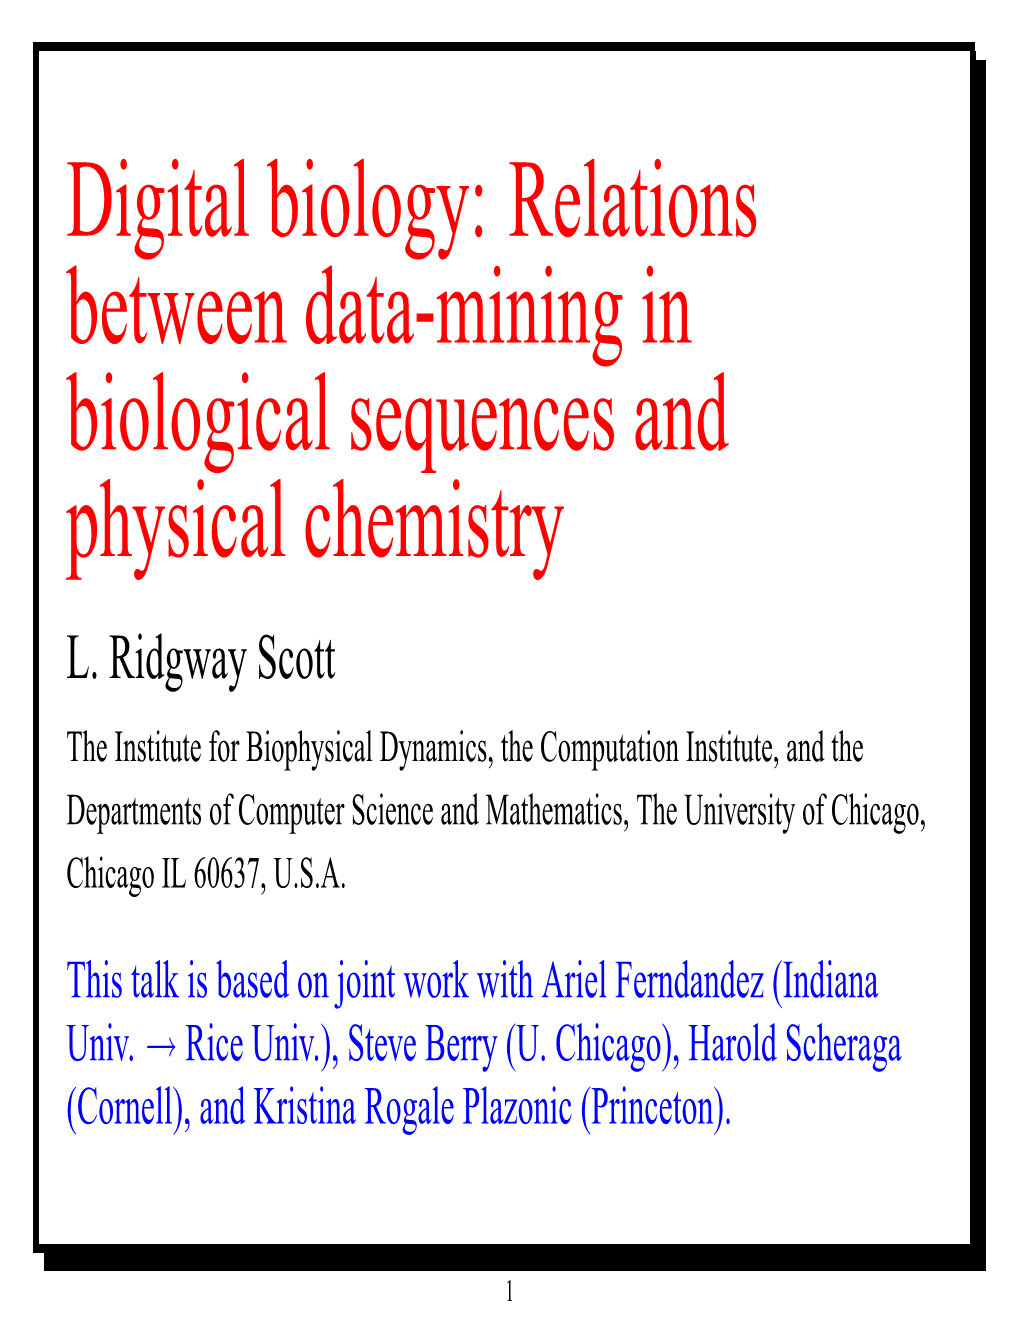 Digital Biology: Relations Between Data-Mining in Biological Sequences and Physical Chemistry L